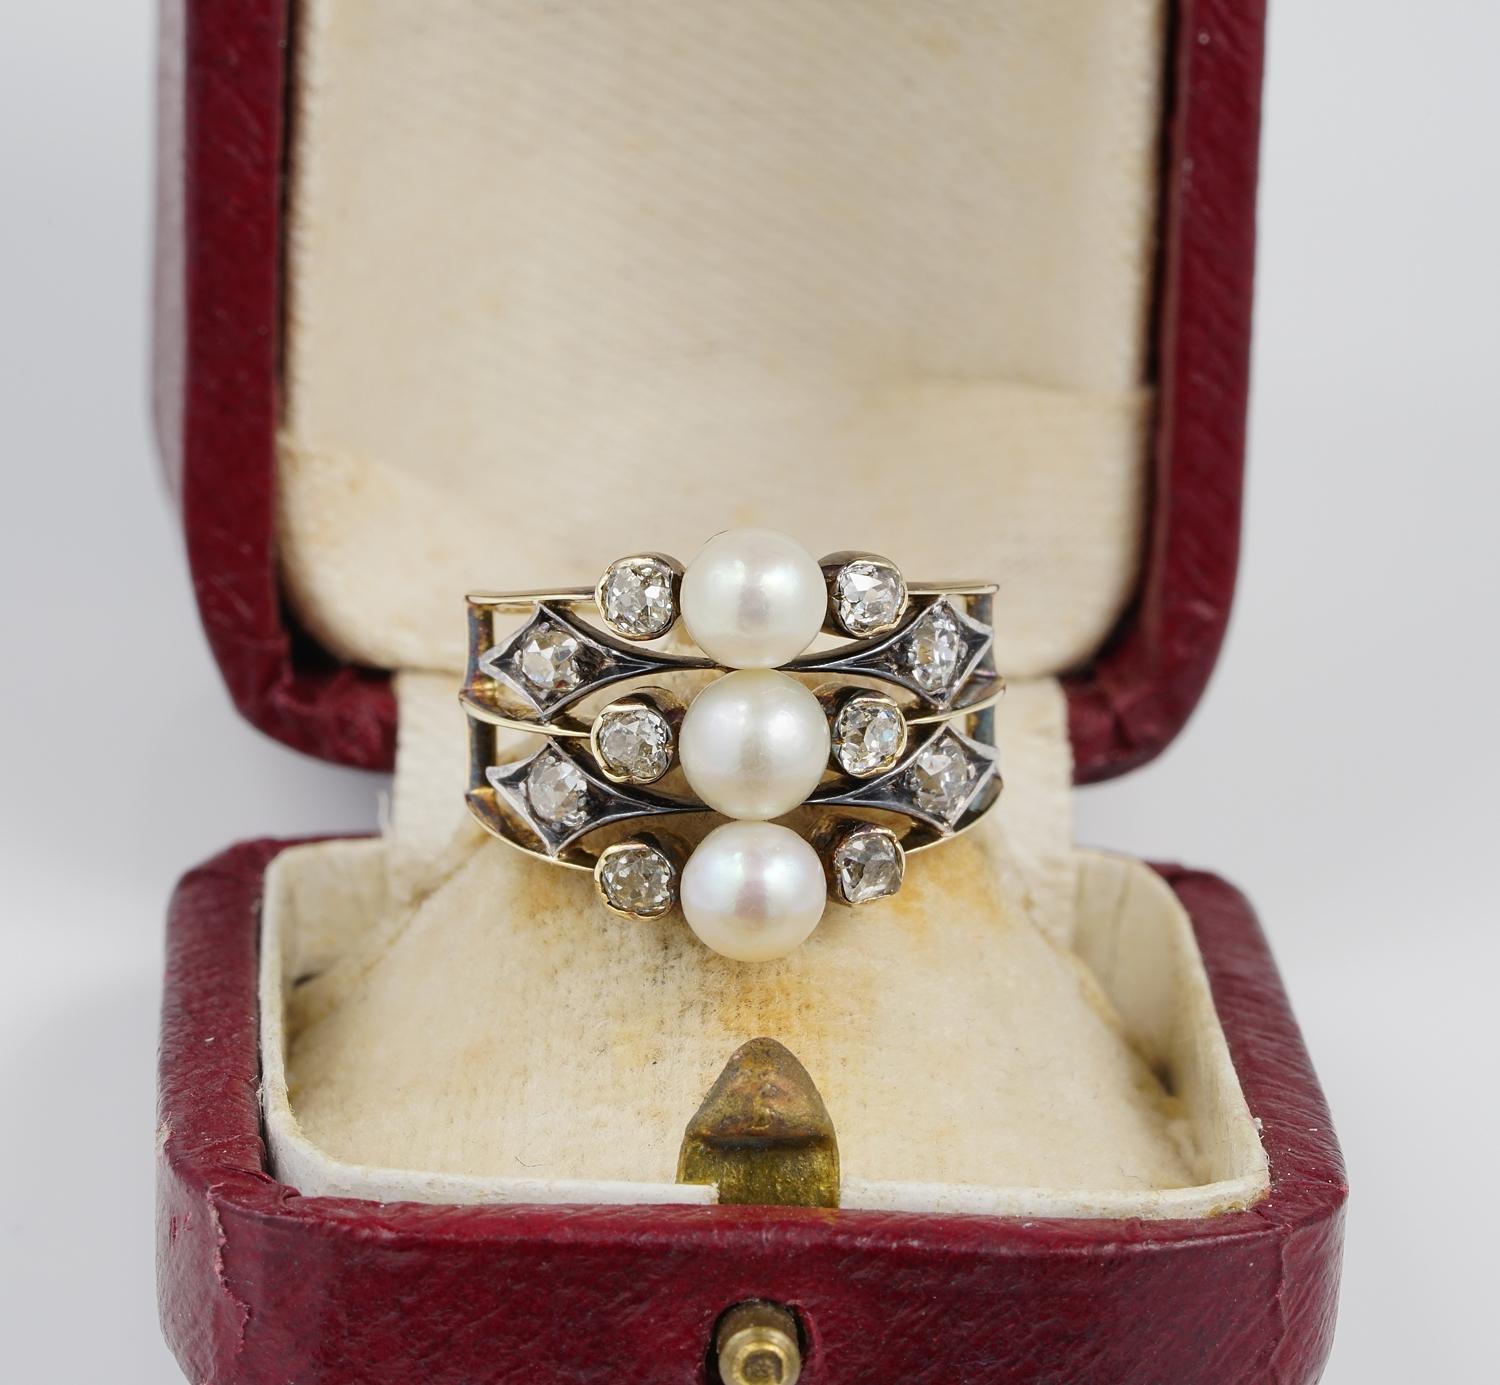 An unique Victorian example, 1870 ca
Very beautiful, fashioned upon three rare Natural not Nucleated Salt Sea Pearls, the trio inspired the whole unique design
1.0 Full carat of old mine cut Diamonds spreading as complement with glowing sparkle to